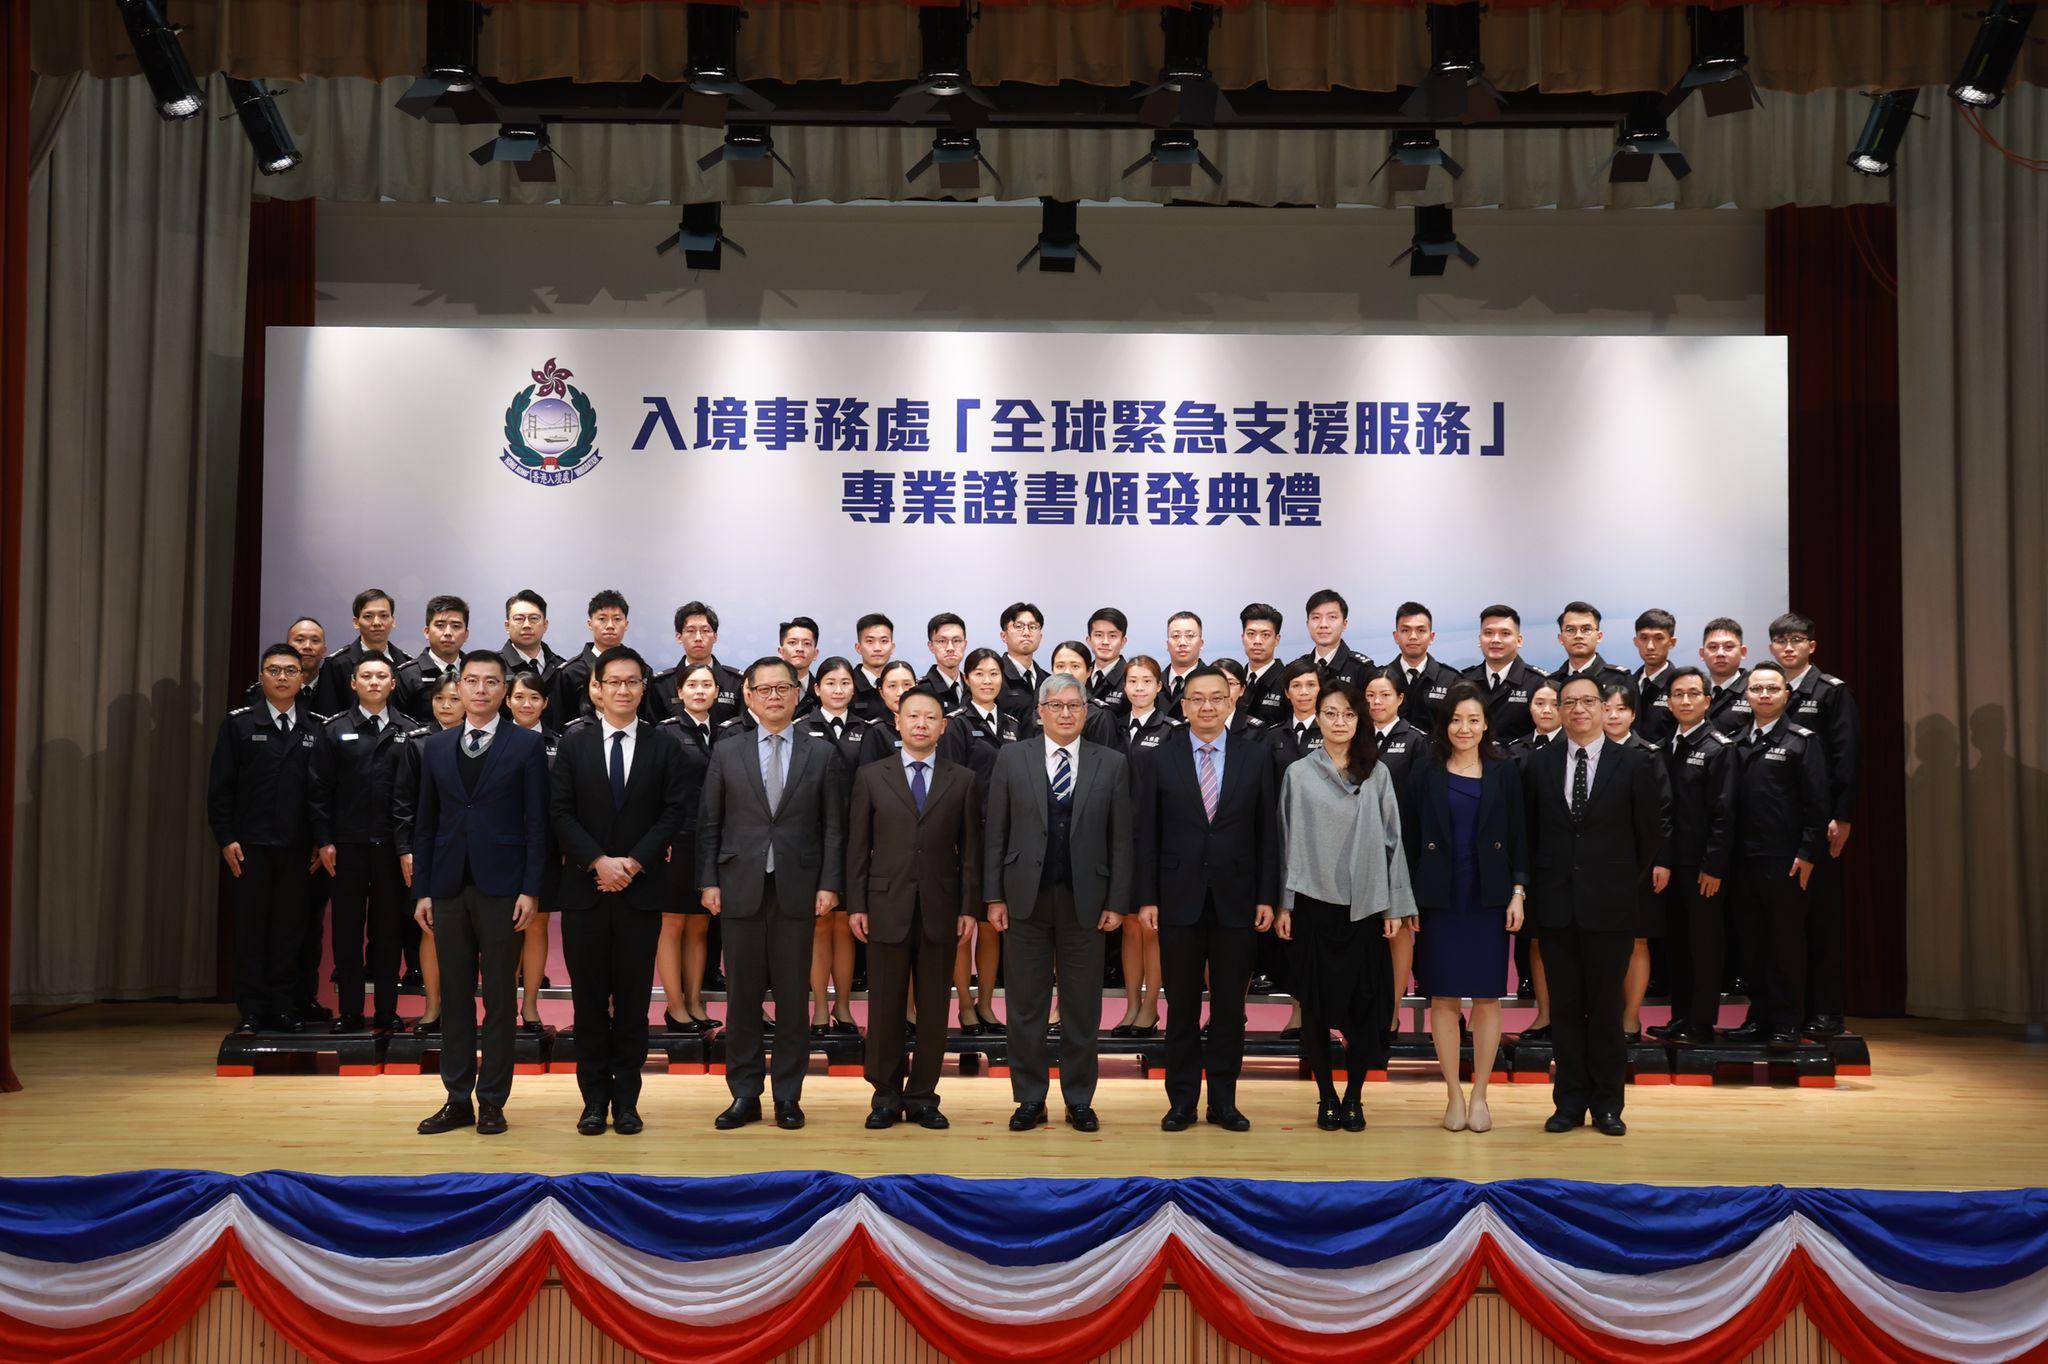 The Director of Immigration, Mr Au Ka-wang, officiated at the certificate presentation ceremony of "Professional Certificate in Worldwide Emergency Assistance Services for Immigration Service Members" today (March 28). Picture shows Mr Au (front row, centre) and the Deputy Director-General of the Consular Department, Office of the Commissioner of the Ministry of Foreign Affairs in the Hong Kong Special Administrative Region, Mr Zheng Jie (front row, fourth left), with guests, Immigration Officers and graduates at the ceremony.